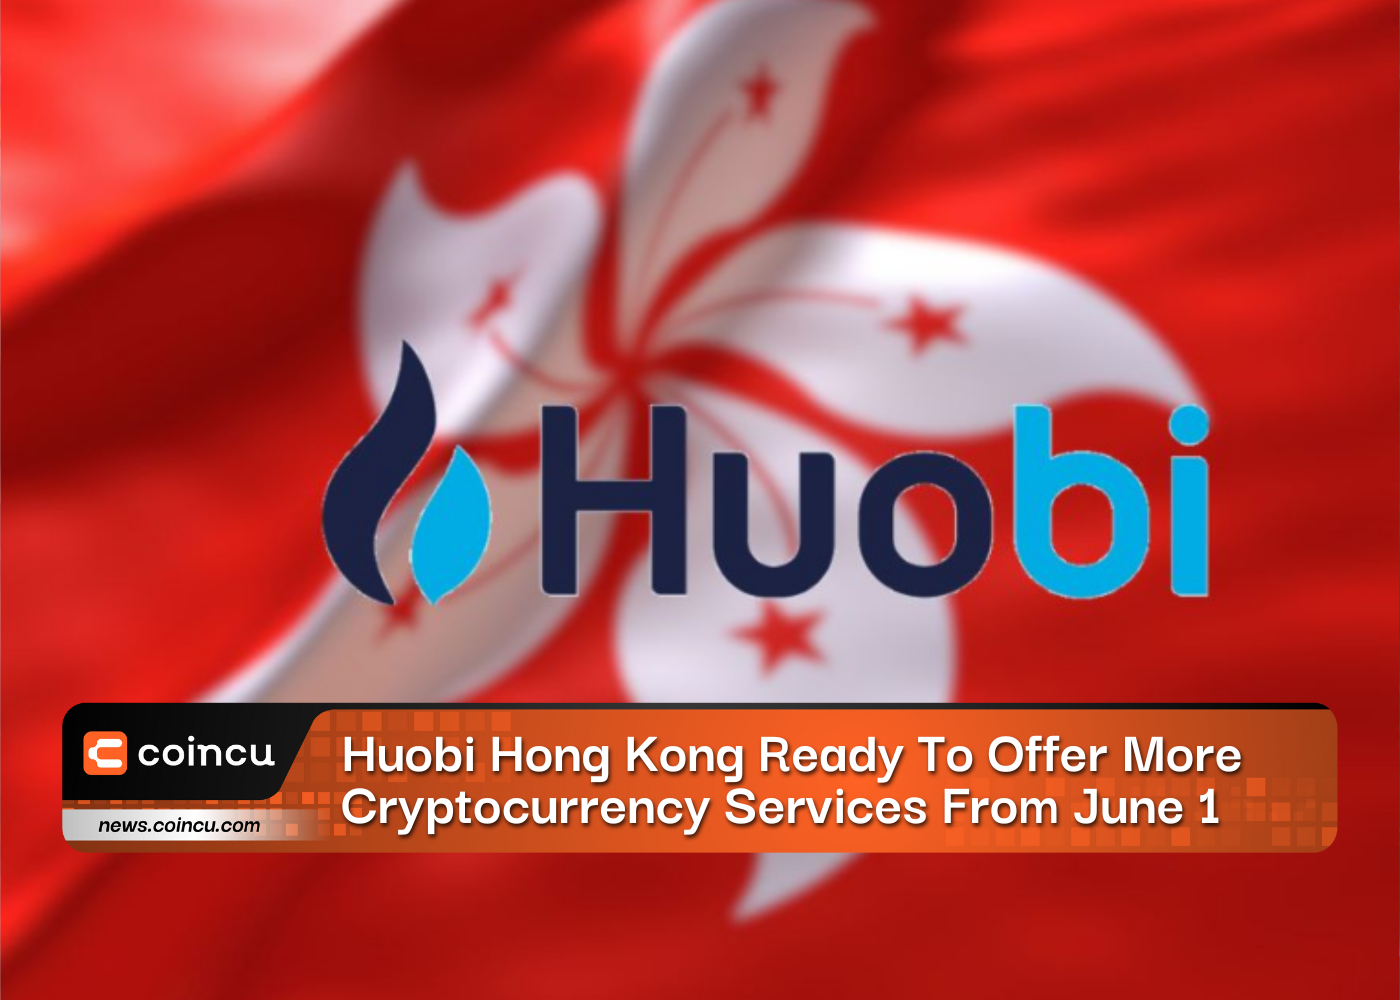 Huobi Hong Kong Ready To Offer More Cryptocurrency Services From June 1